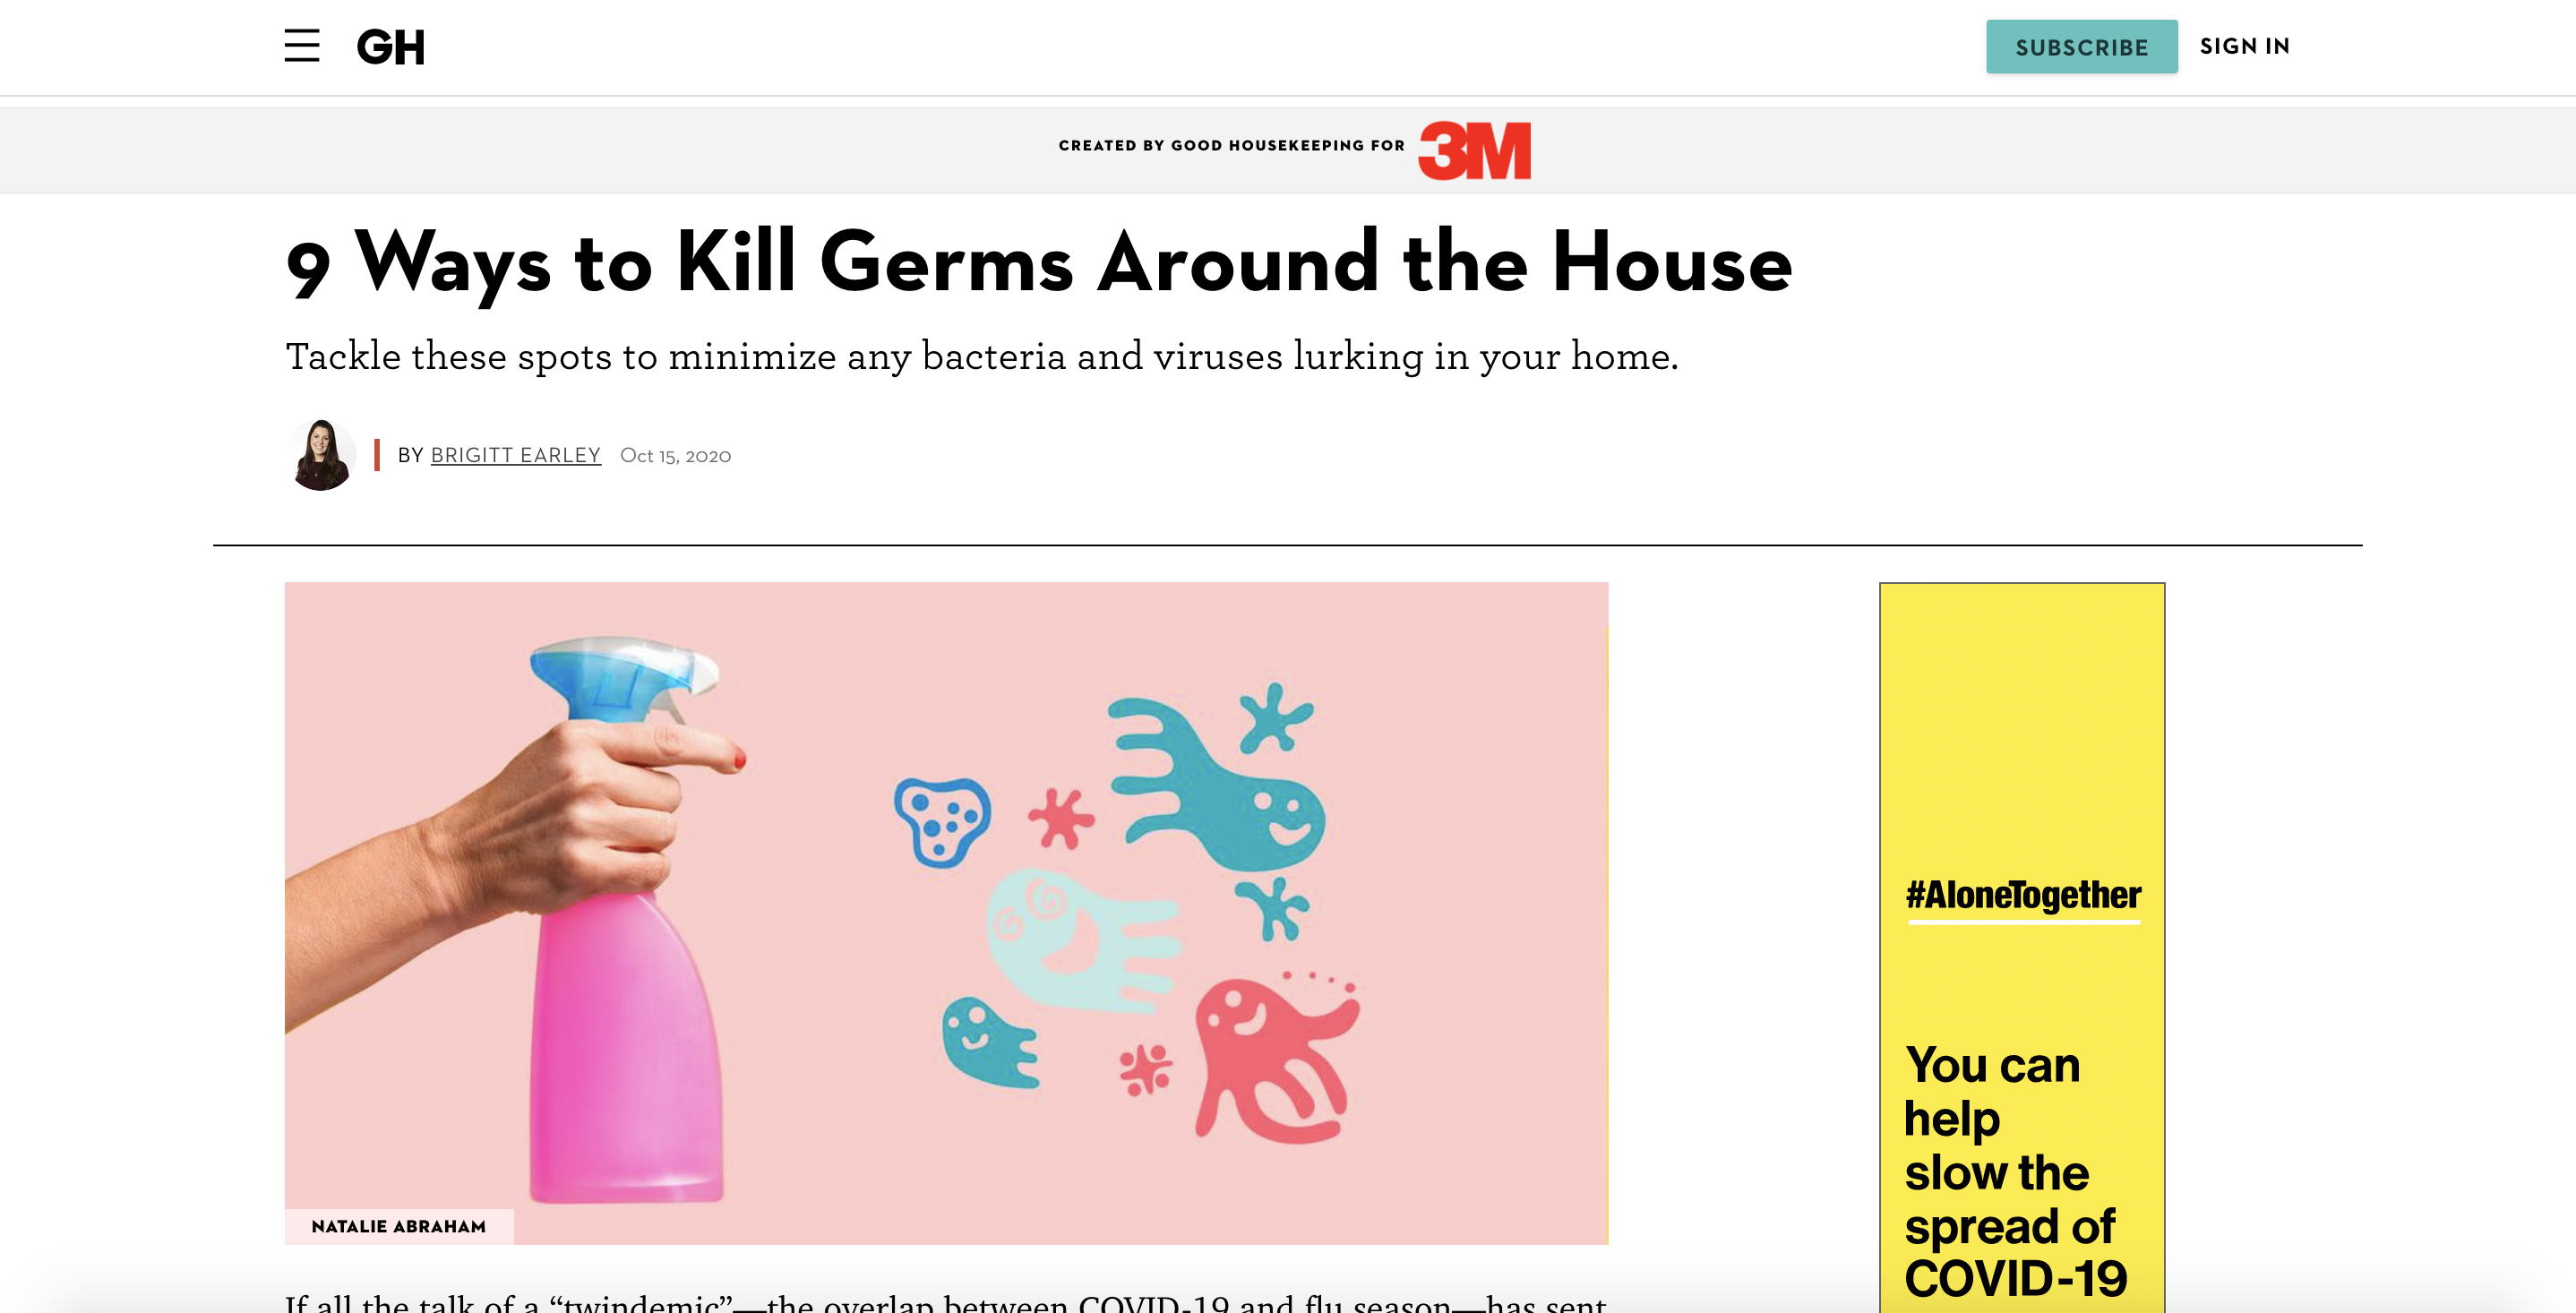 3M with Good House Keeping